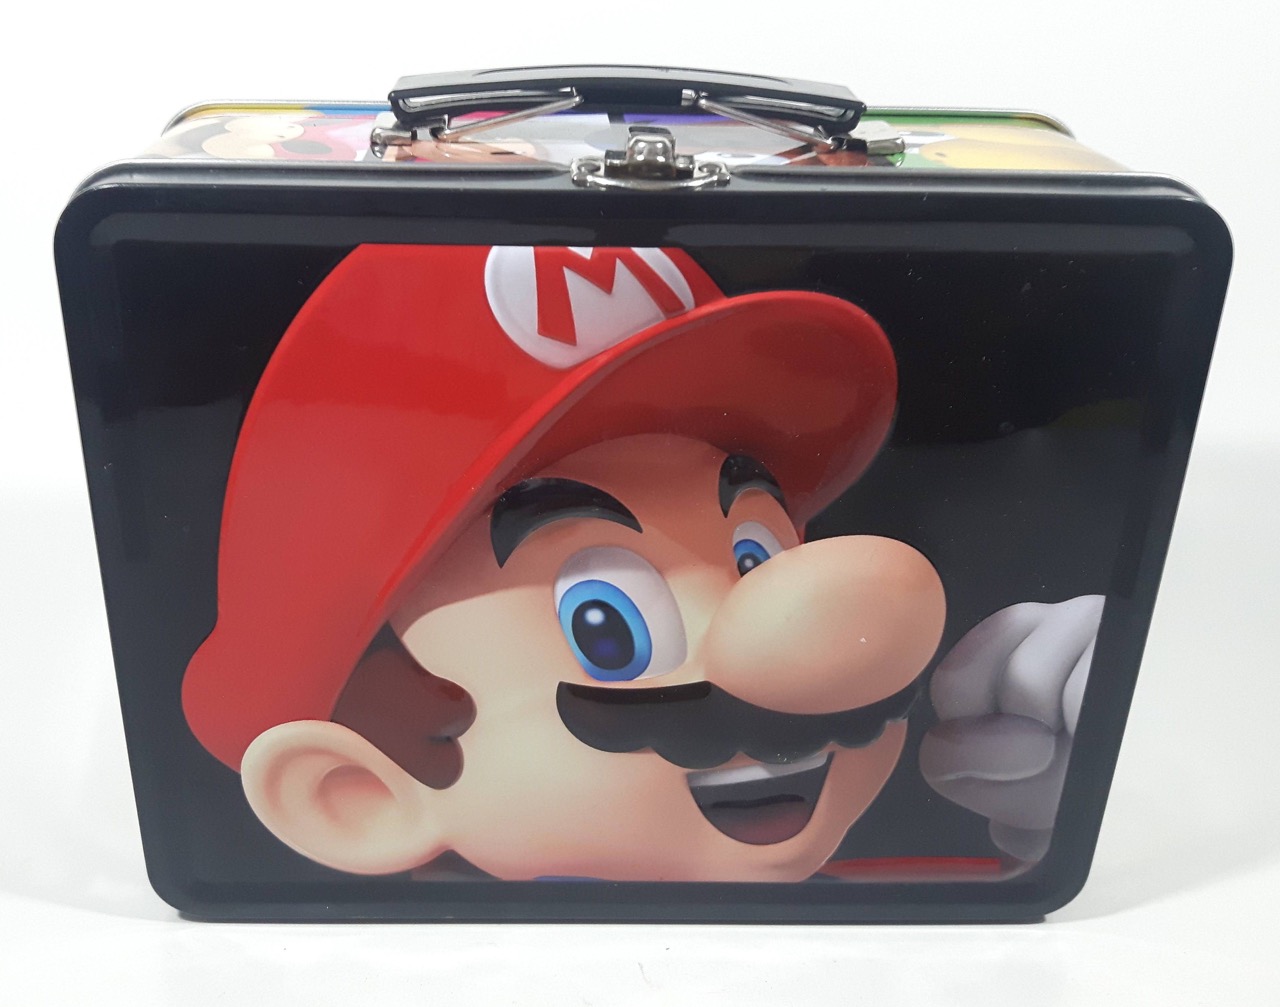 https://storables.com/wp-content/uploads/2023/08/15-amazing-super-mario-lunch-box-for-2023-1692089306.jpeg